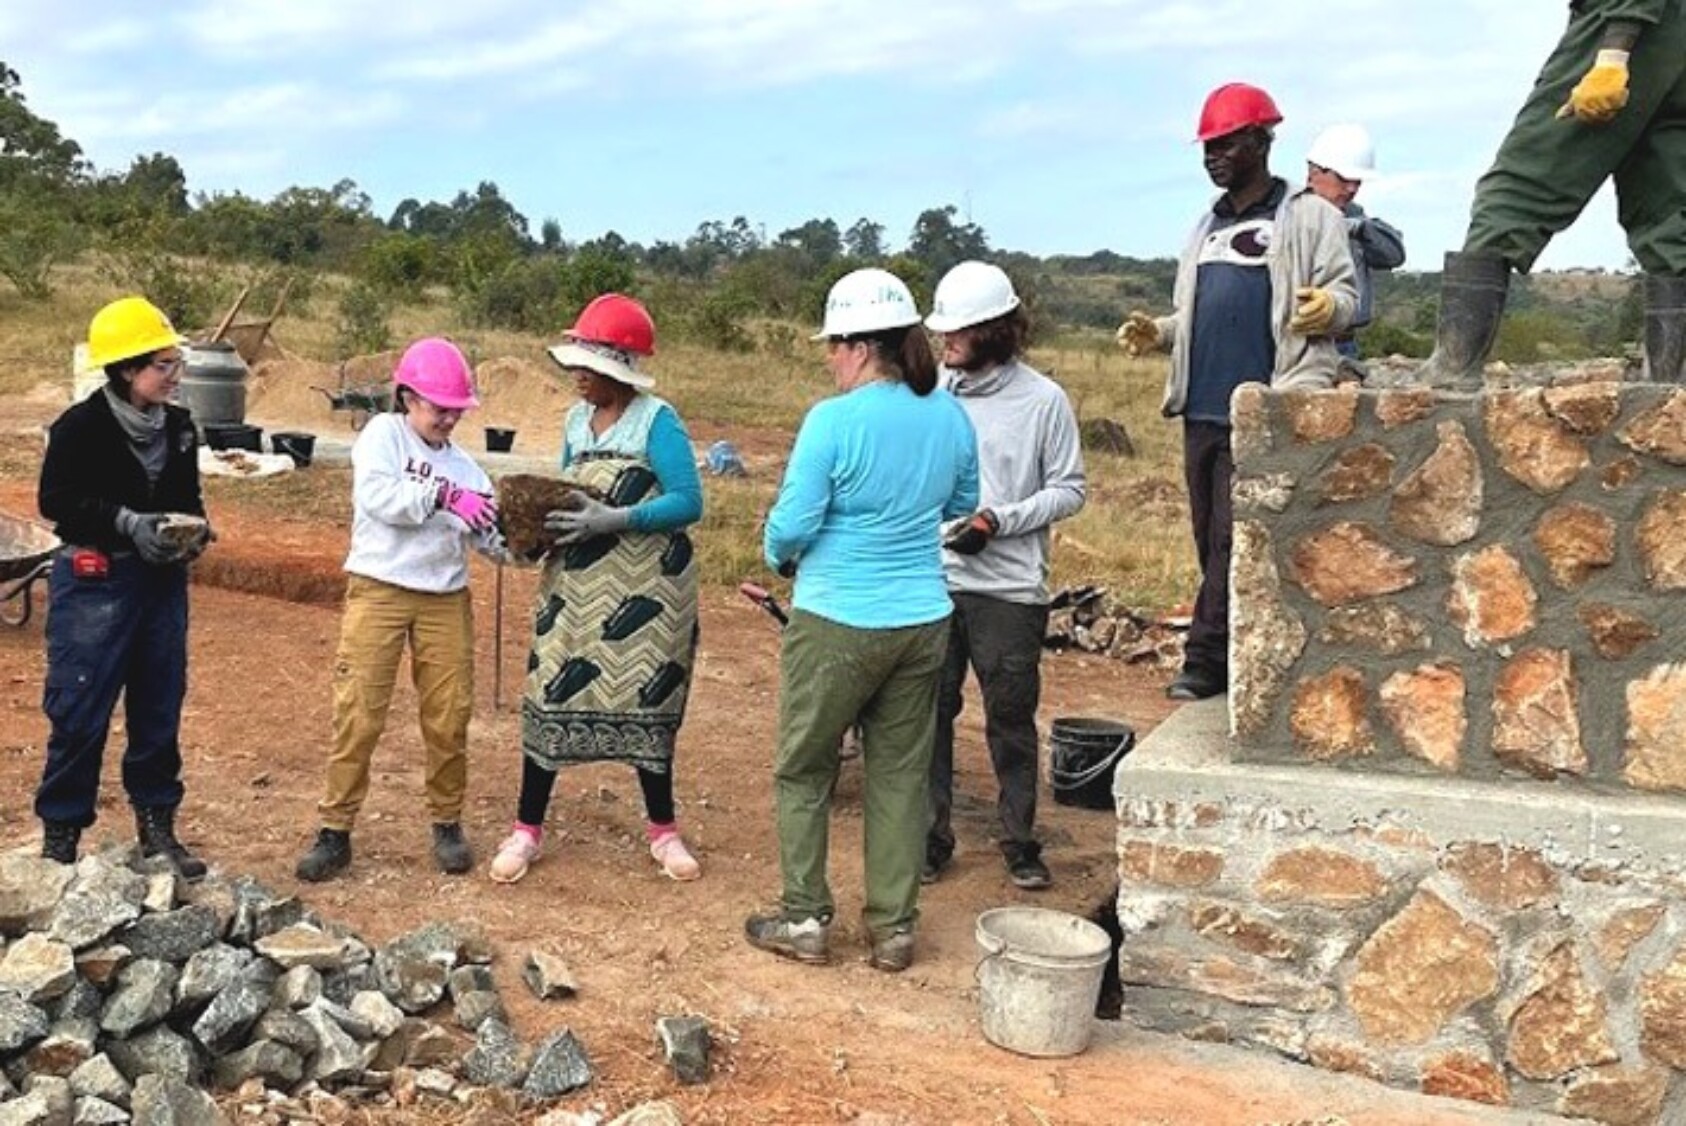 In summer 2022, the team worked with two communities in the Kingdom of Eswatini to build a 100-meter footbridge which will help over 2,000 people, including 1,200 schoolchildren, cross the Mtilane River safely.